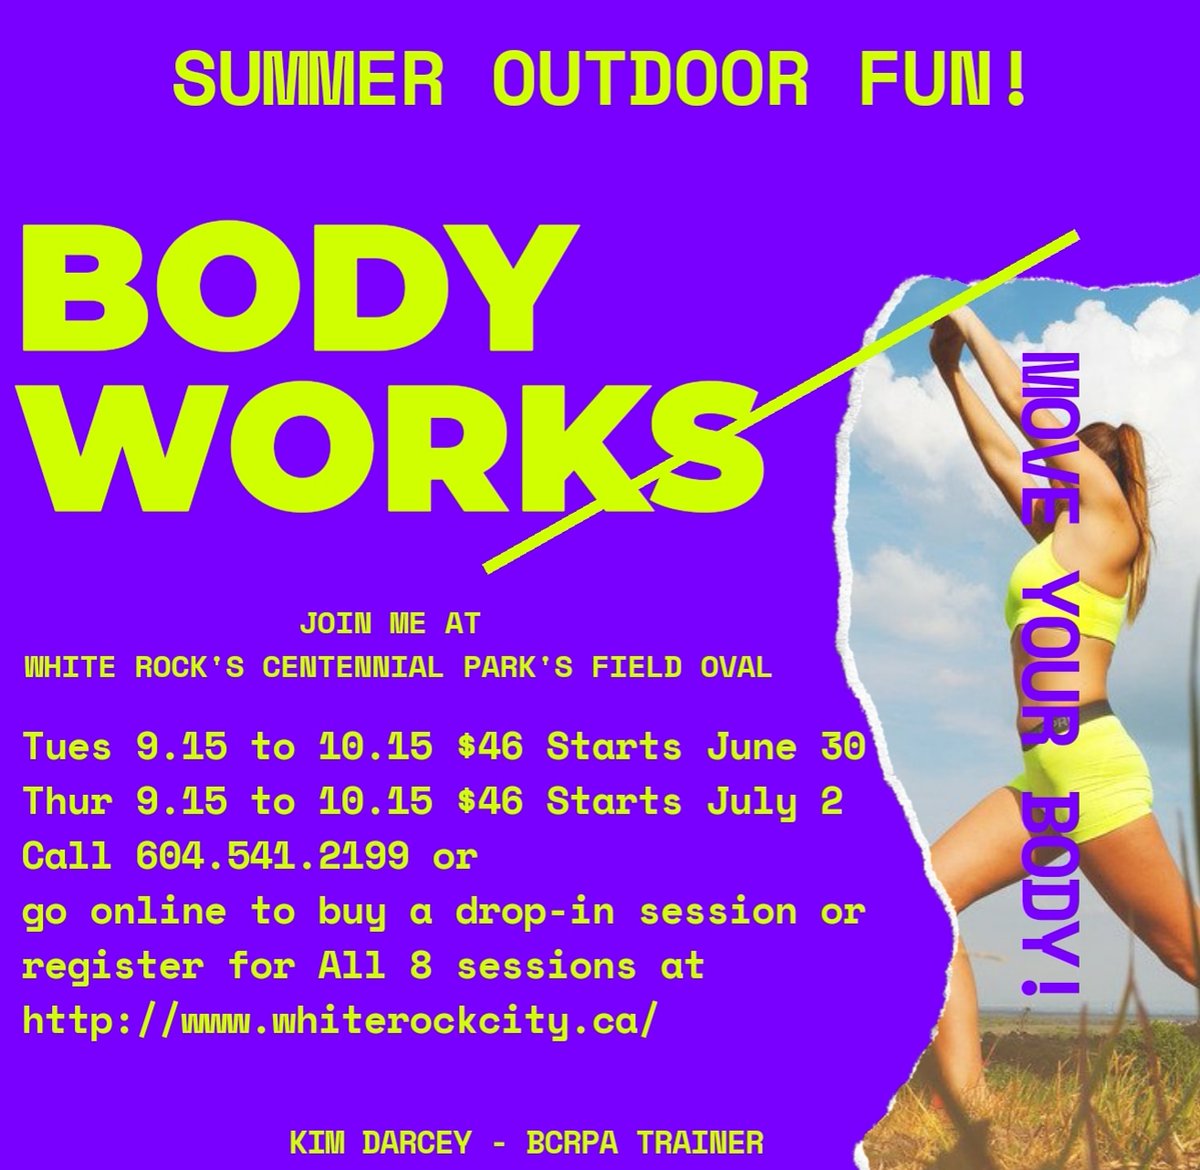 Come and join Kim for a total 'Body Works', 50+ Workout next week @whiterockcity Centennial Park.
Keeping social distancing, staying safe and having fun! 
#workout #50plus #cardio #fitness #muscularstrength #agility #balance